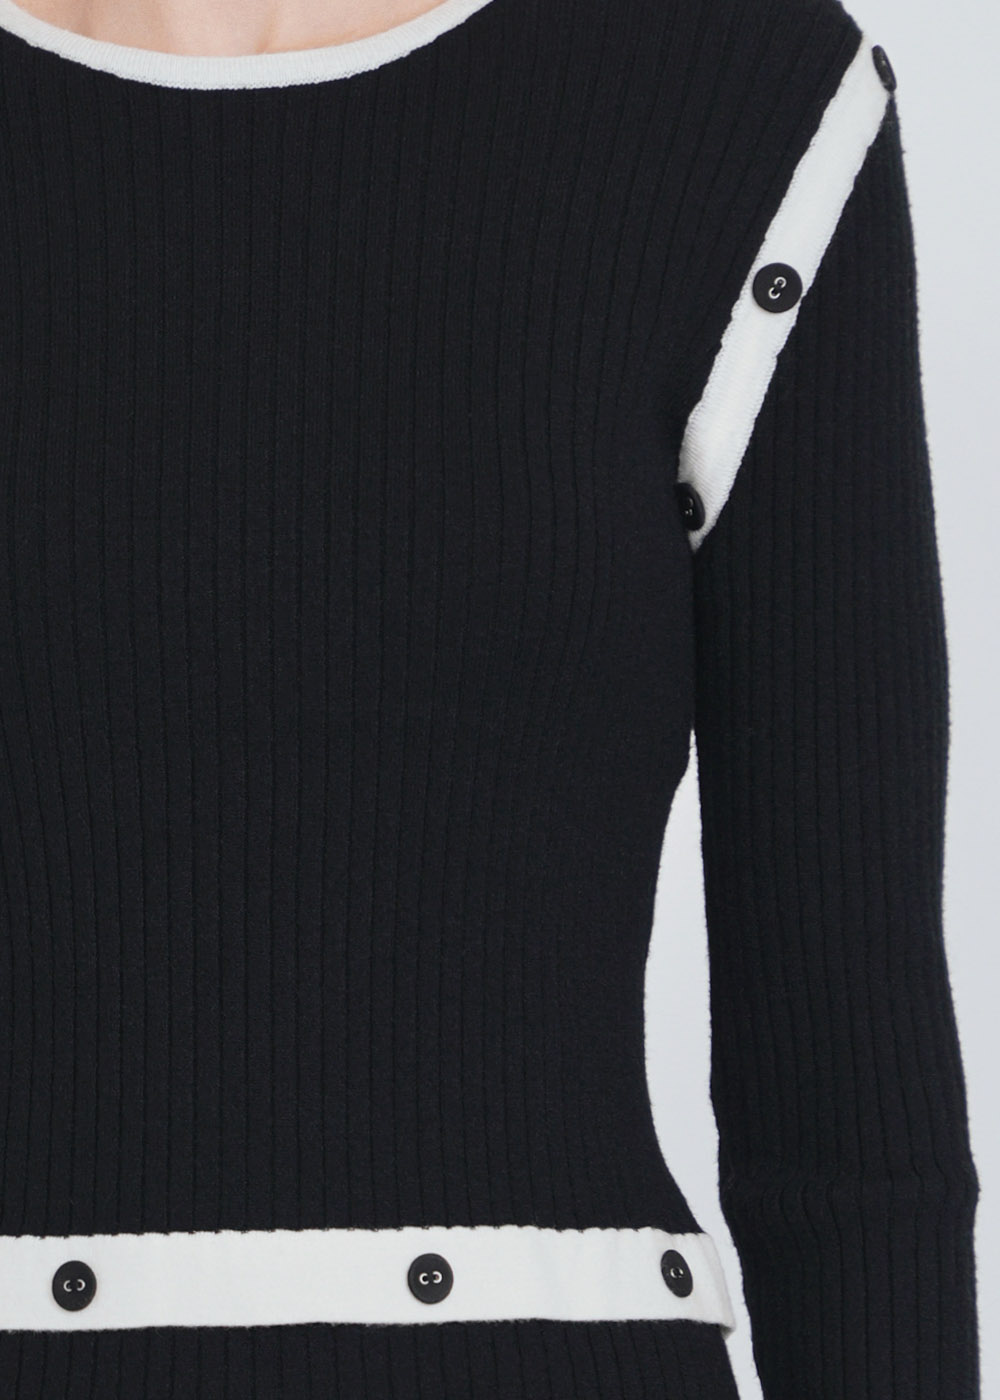 Classic Elegance: Black Ribbed Knit with White Buttoned Bands